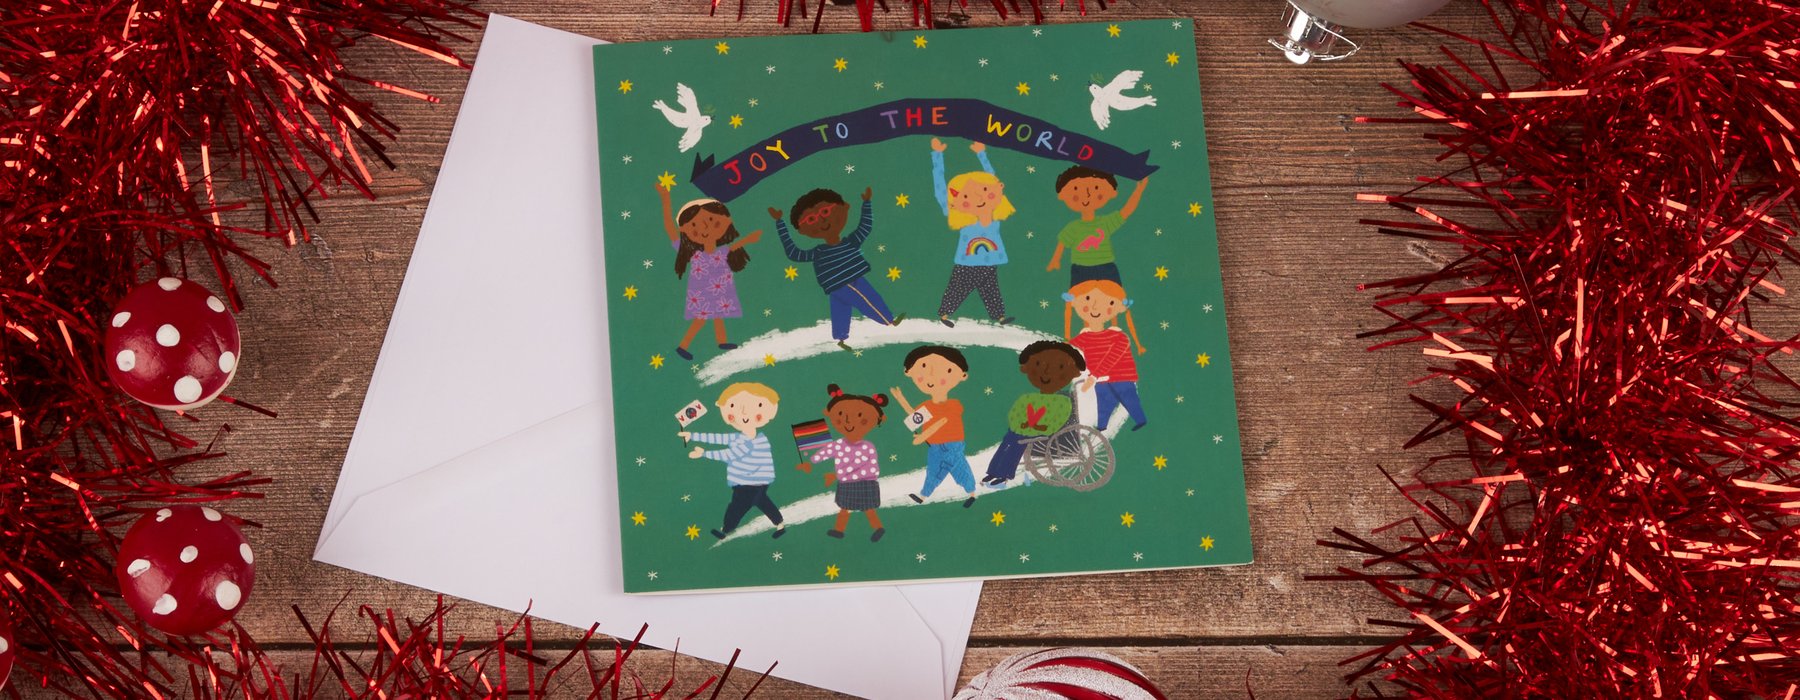 Joy to the World charity Christmas card featuring a cartoon of children from all around the globe